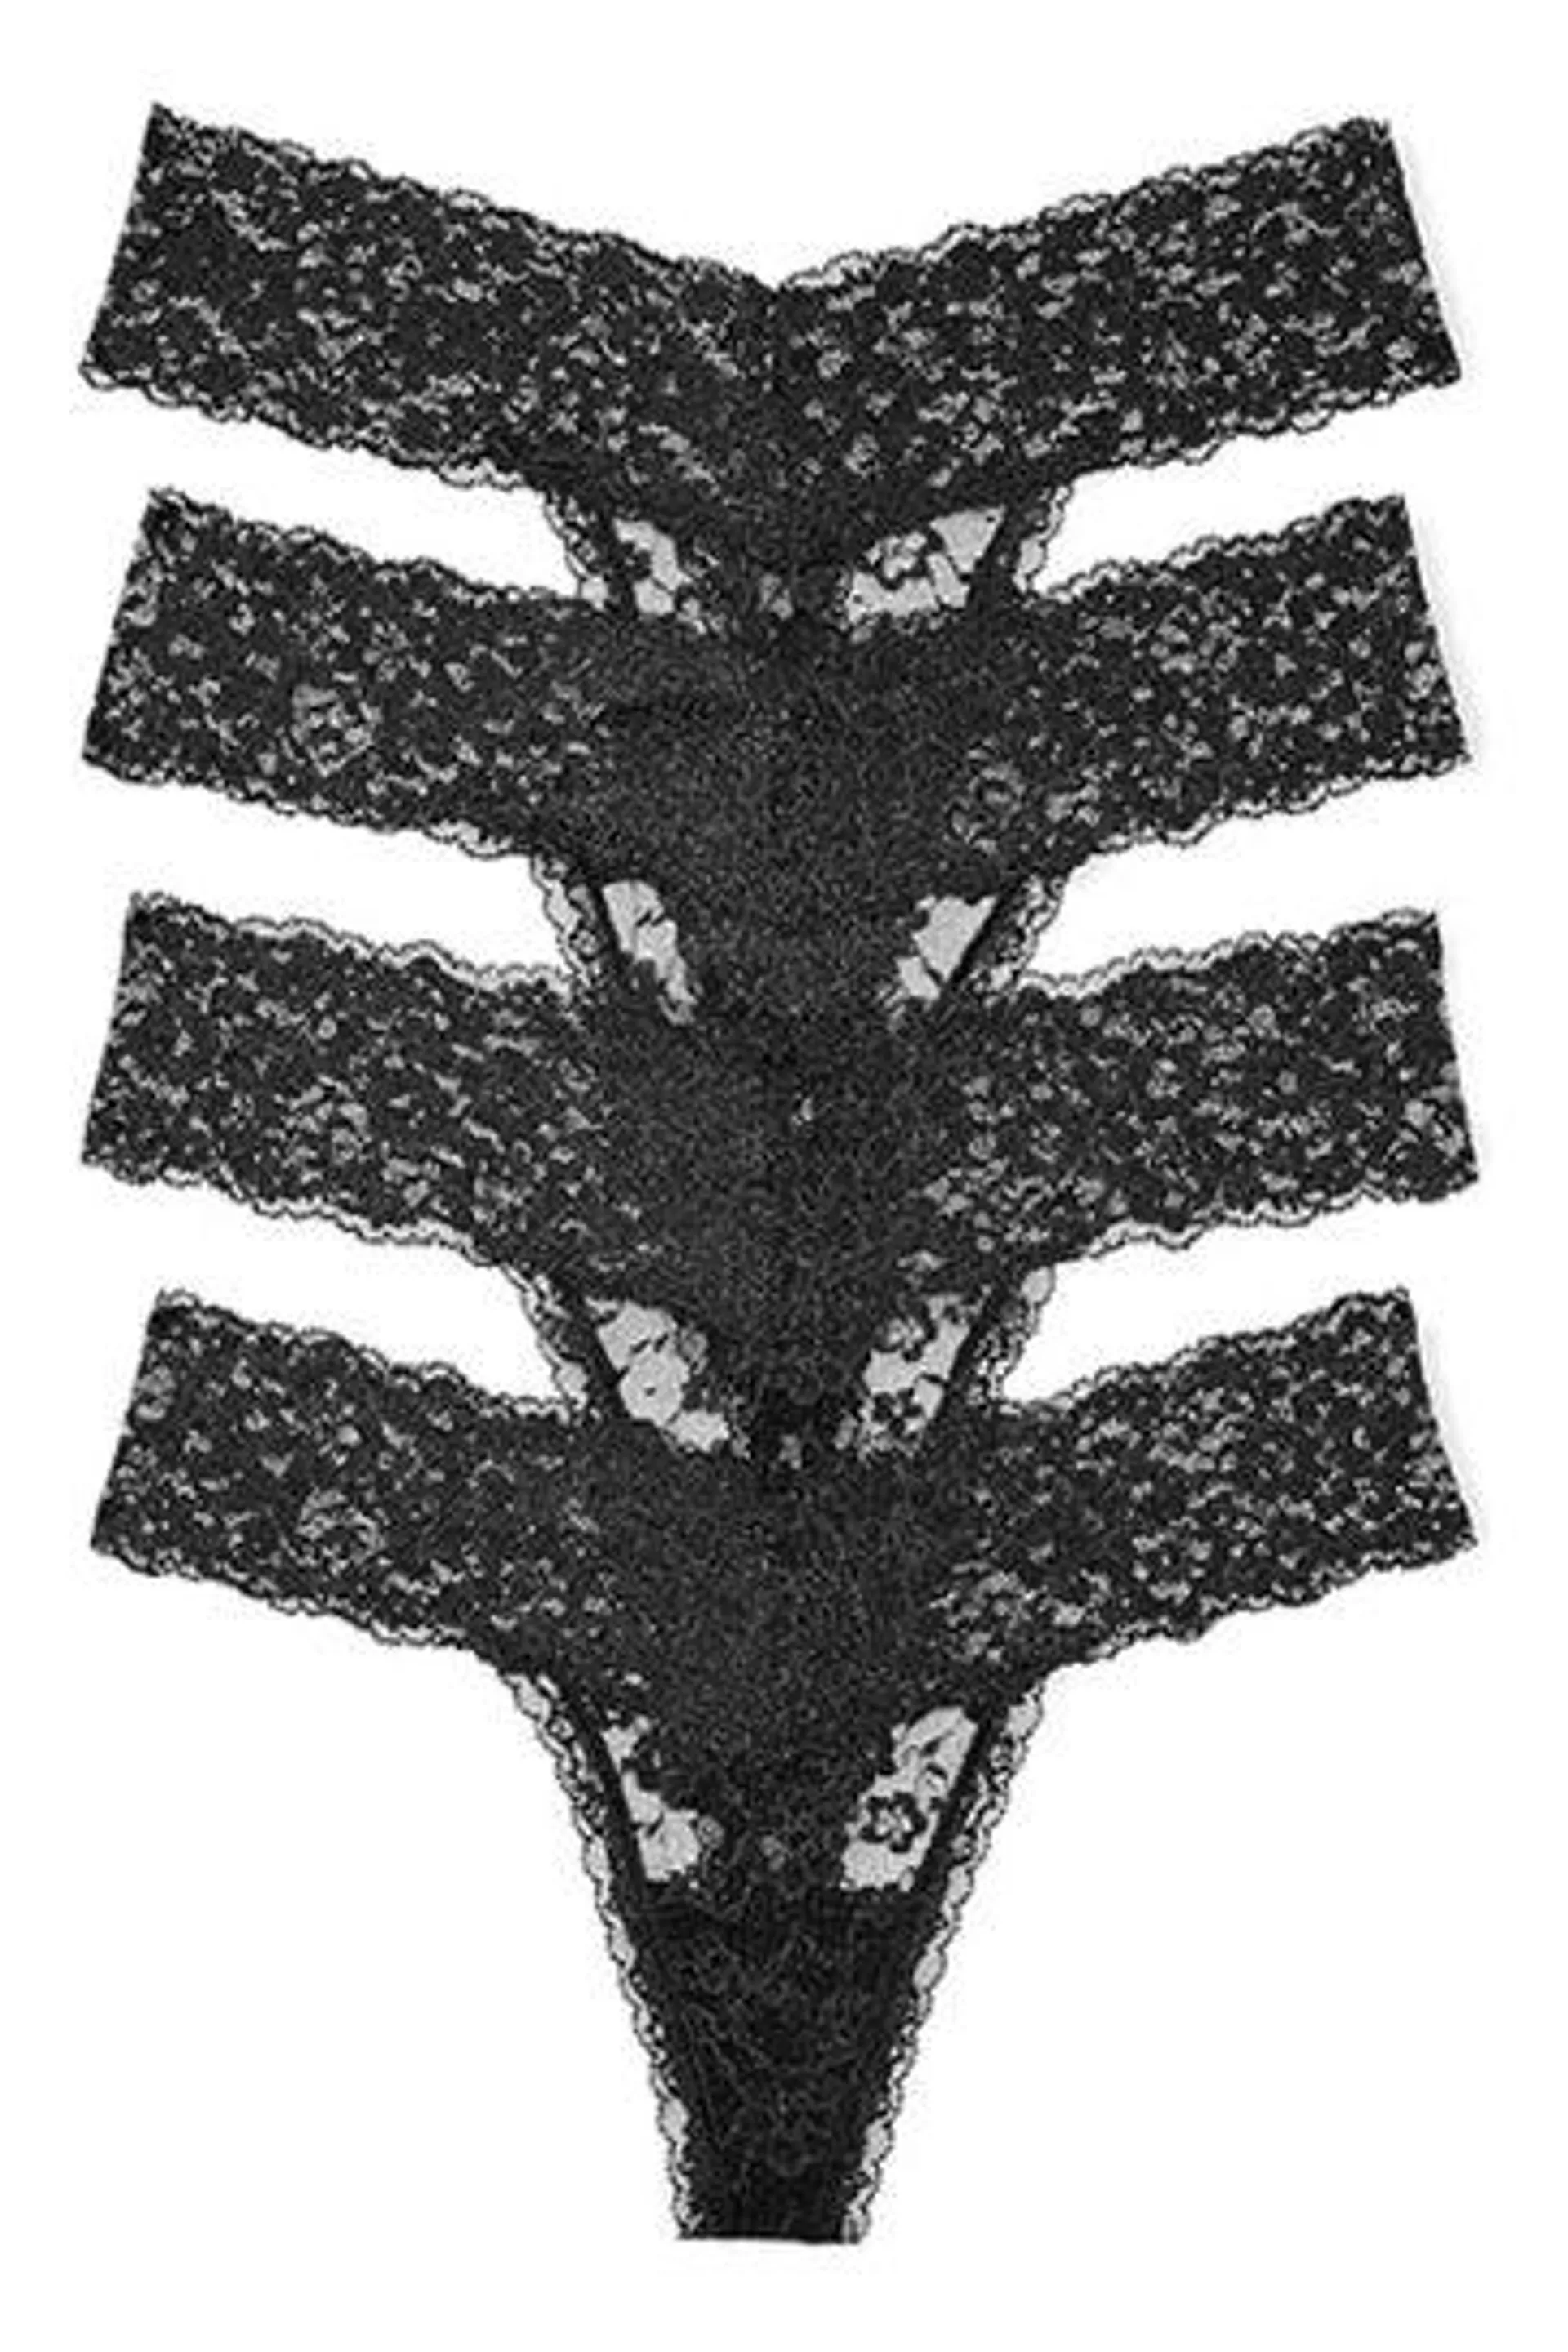 The Lacie Multipack Knickers